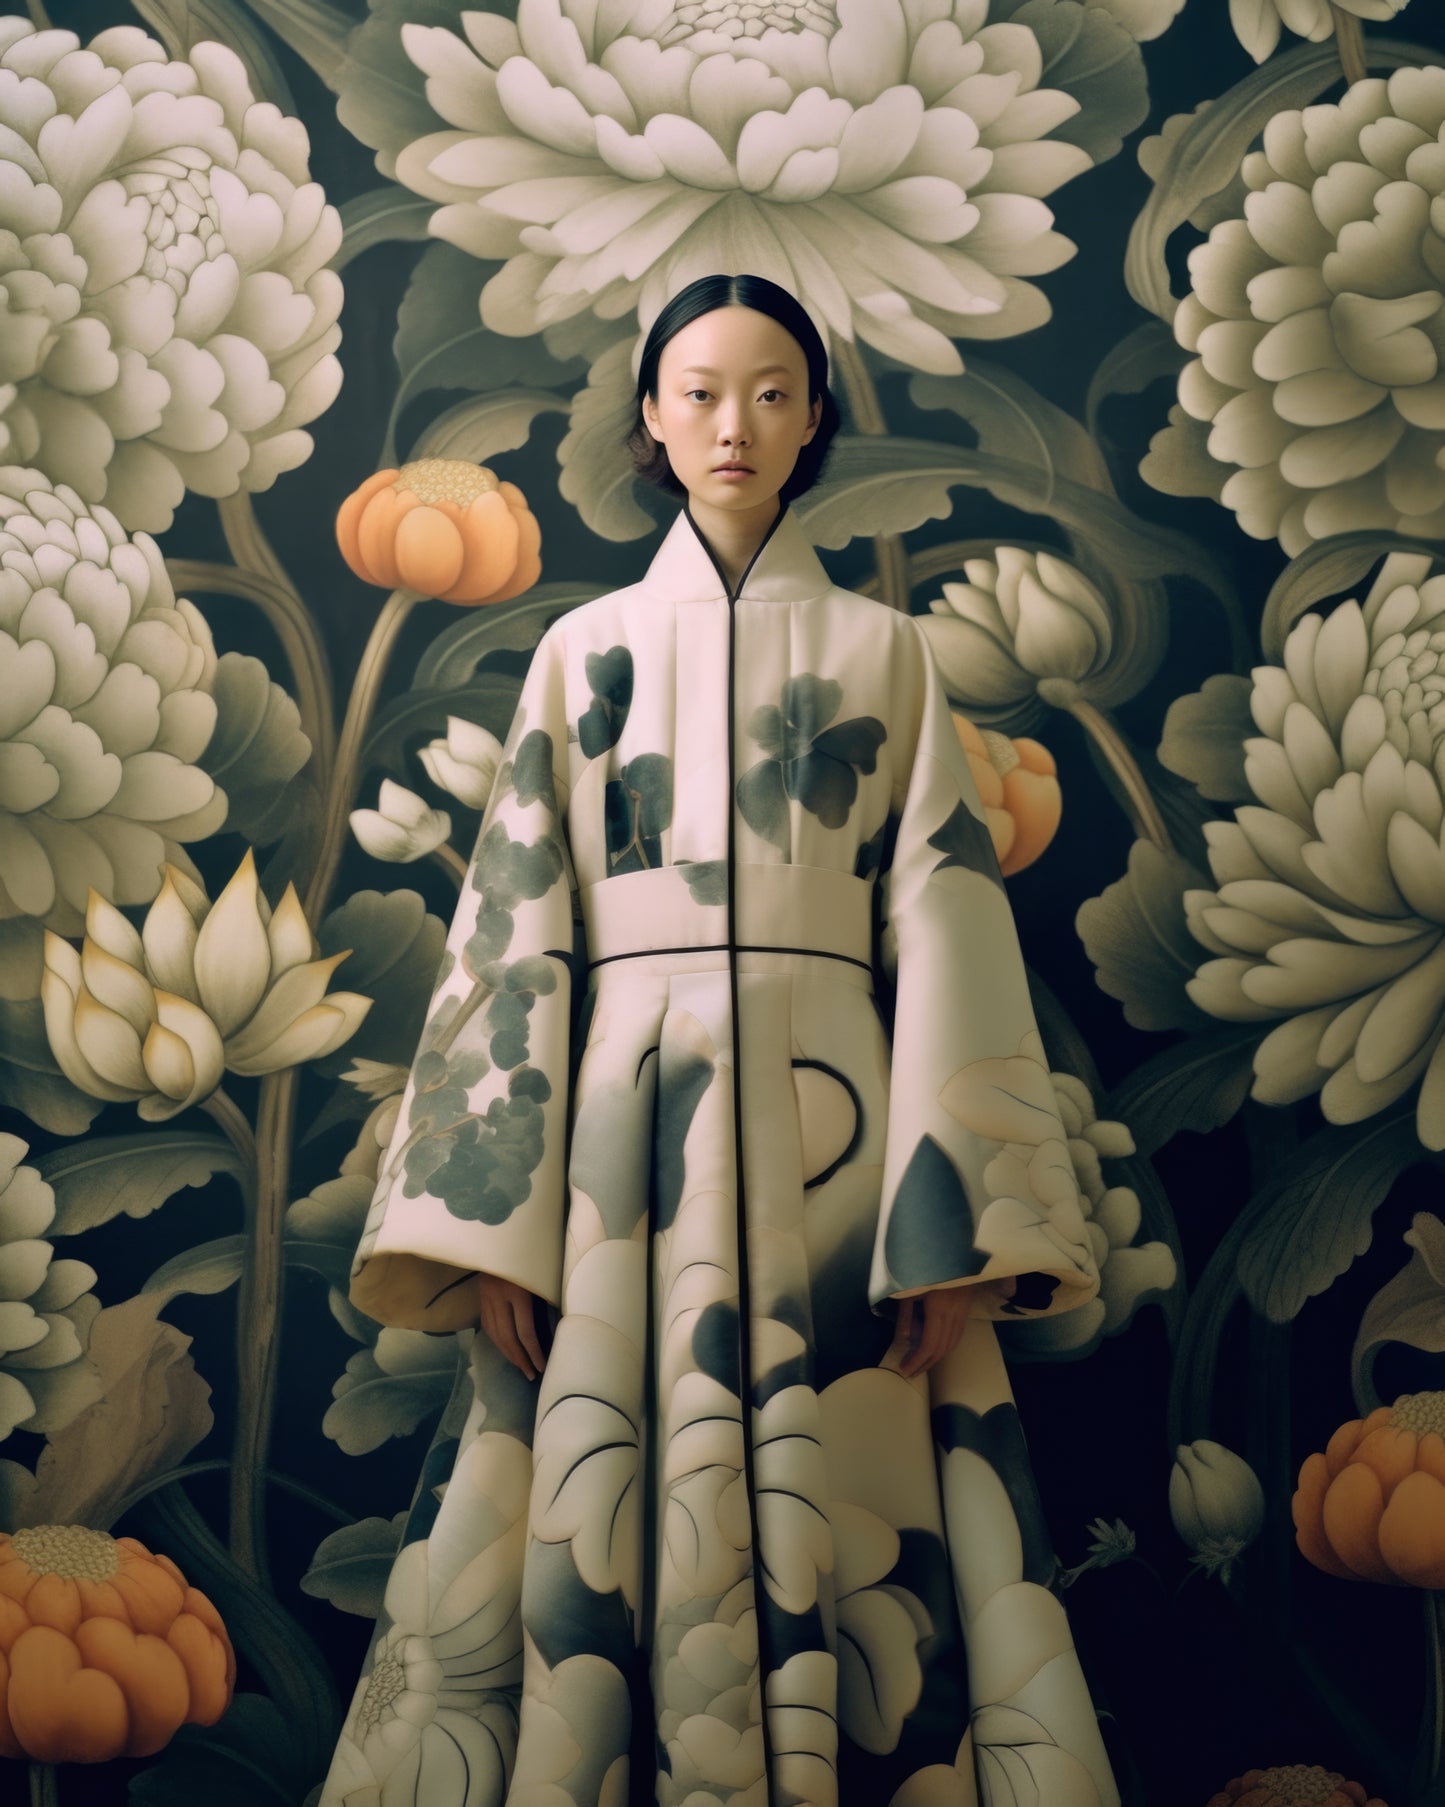 Fine art print featuring a woman dressed in a traditional kimono with monochromatic floral patterns, standing against a background of large, intricately detailed flowers in muted tones. This art print is a stunning example of an artwork print.